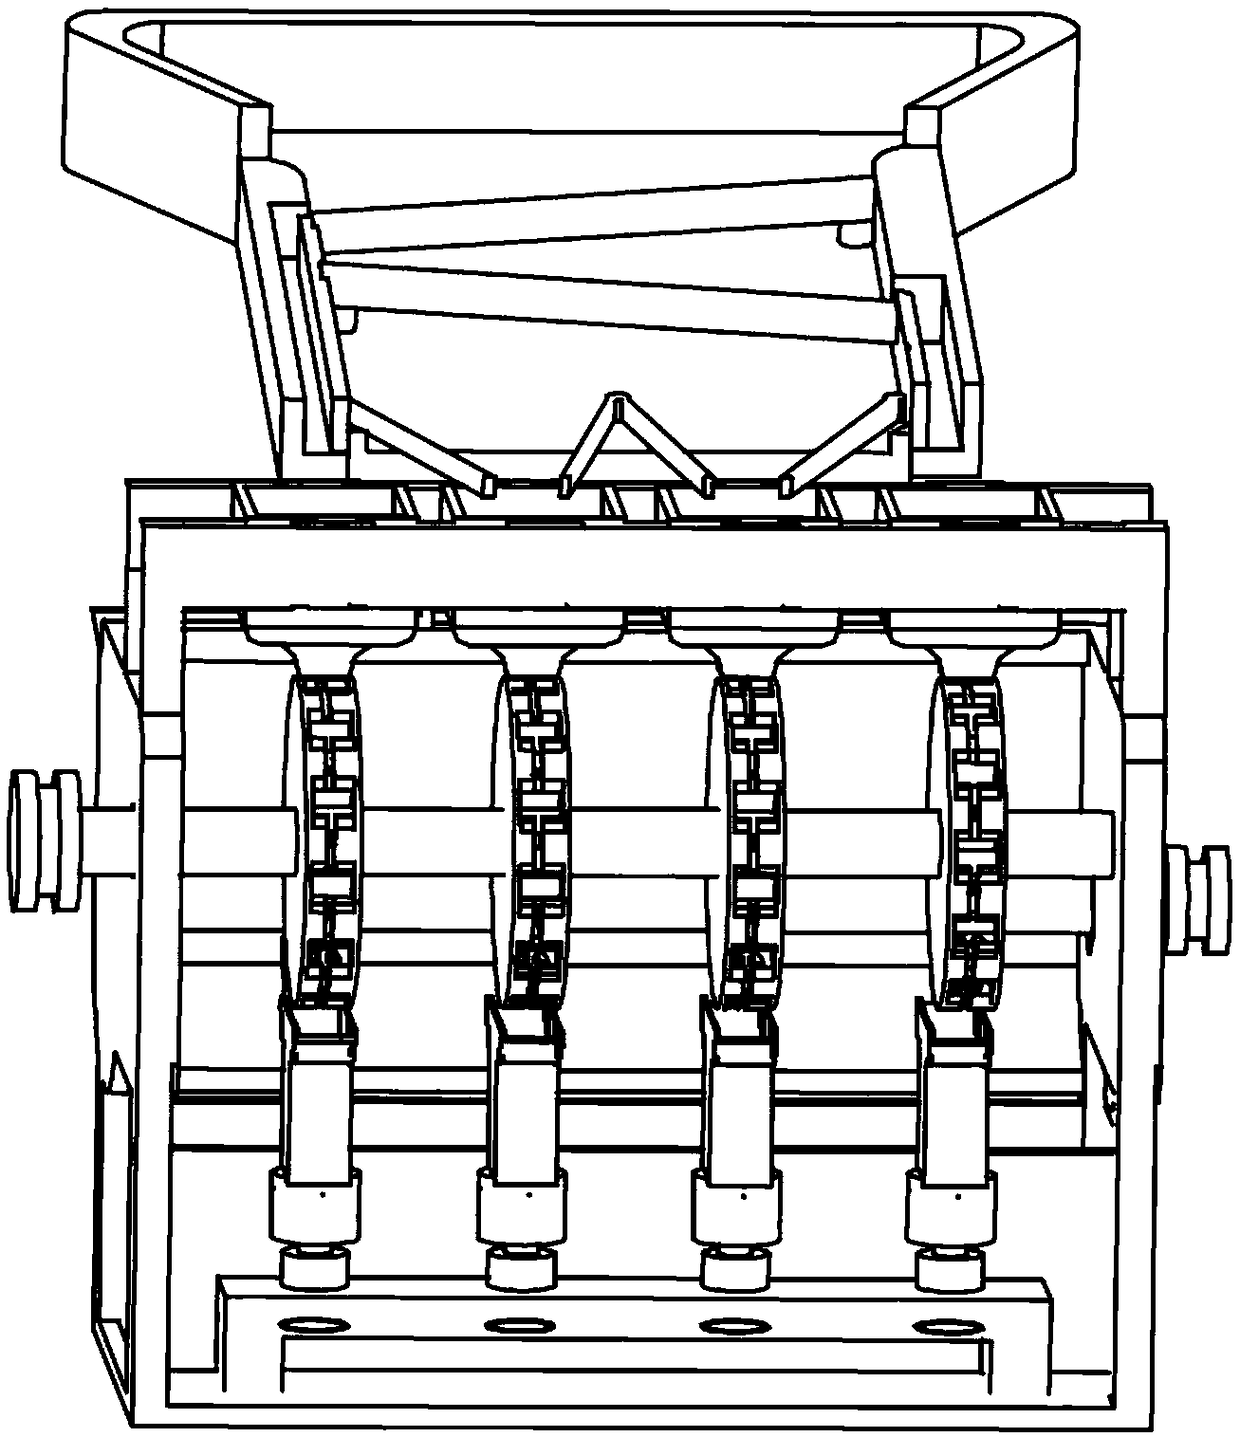 Opening device capable of automatically separating large macadamia nuts from small macadamia nuts